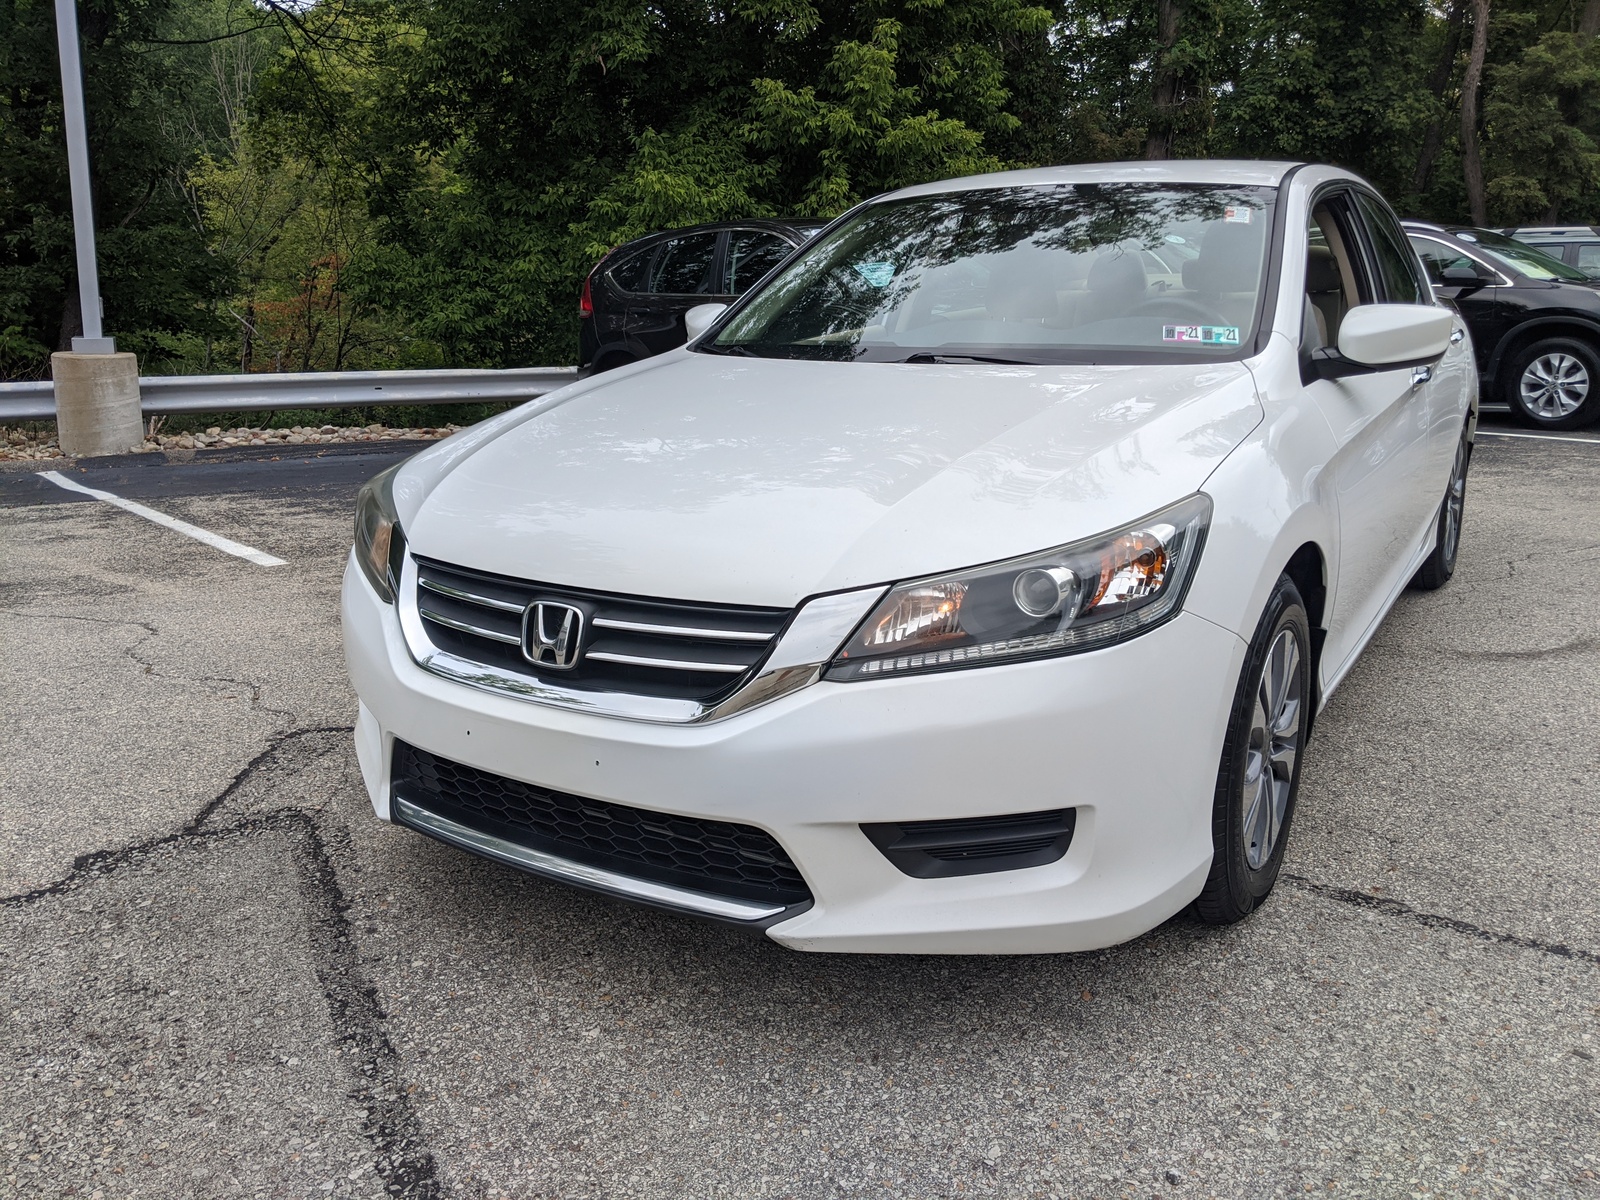 Pre-Owned 2015 Honda Accord LX in White Orchid Pearl | Greensburg | # ...